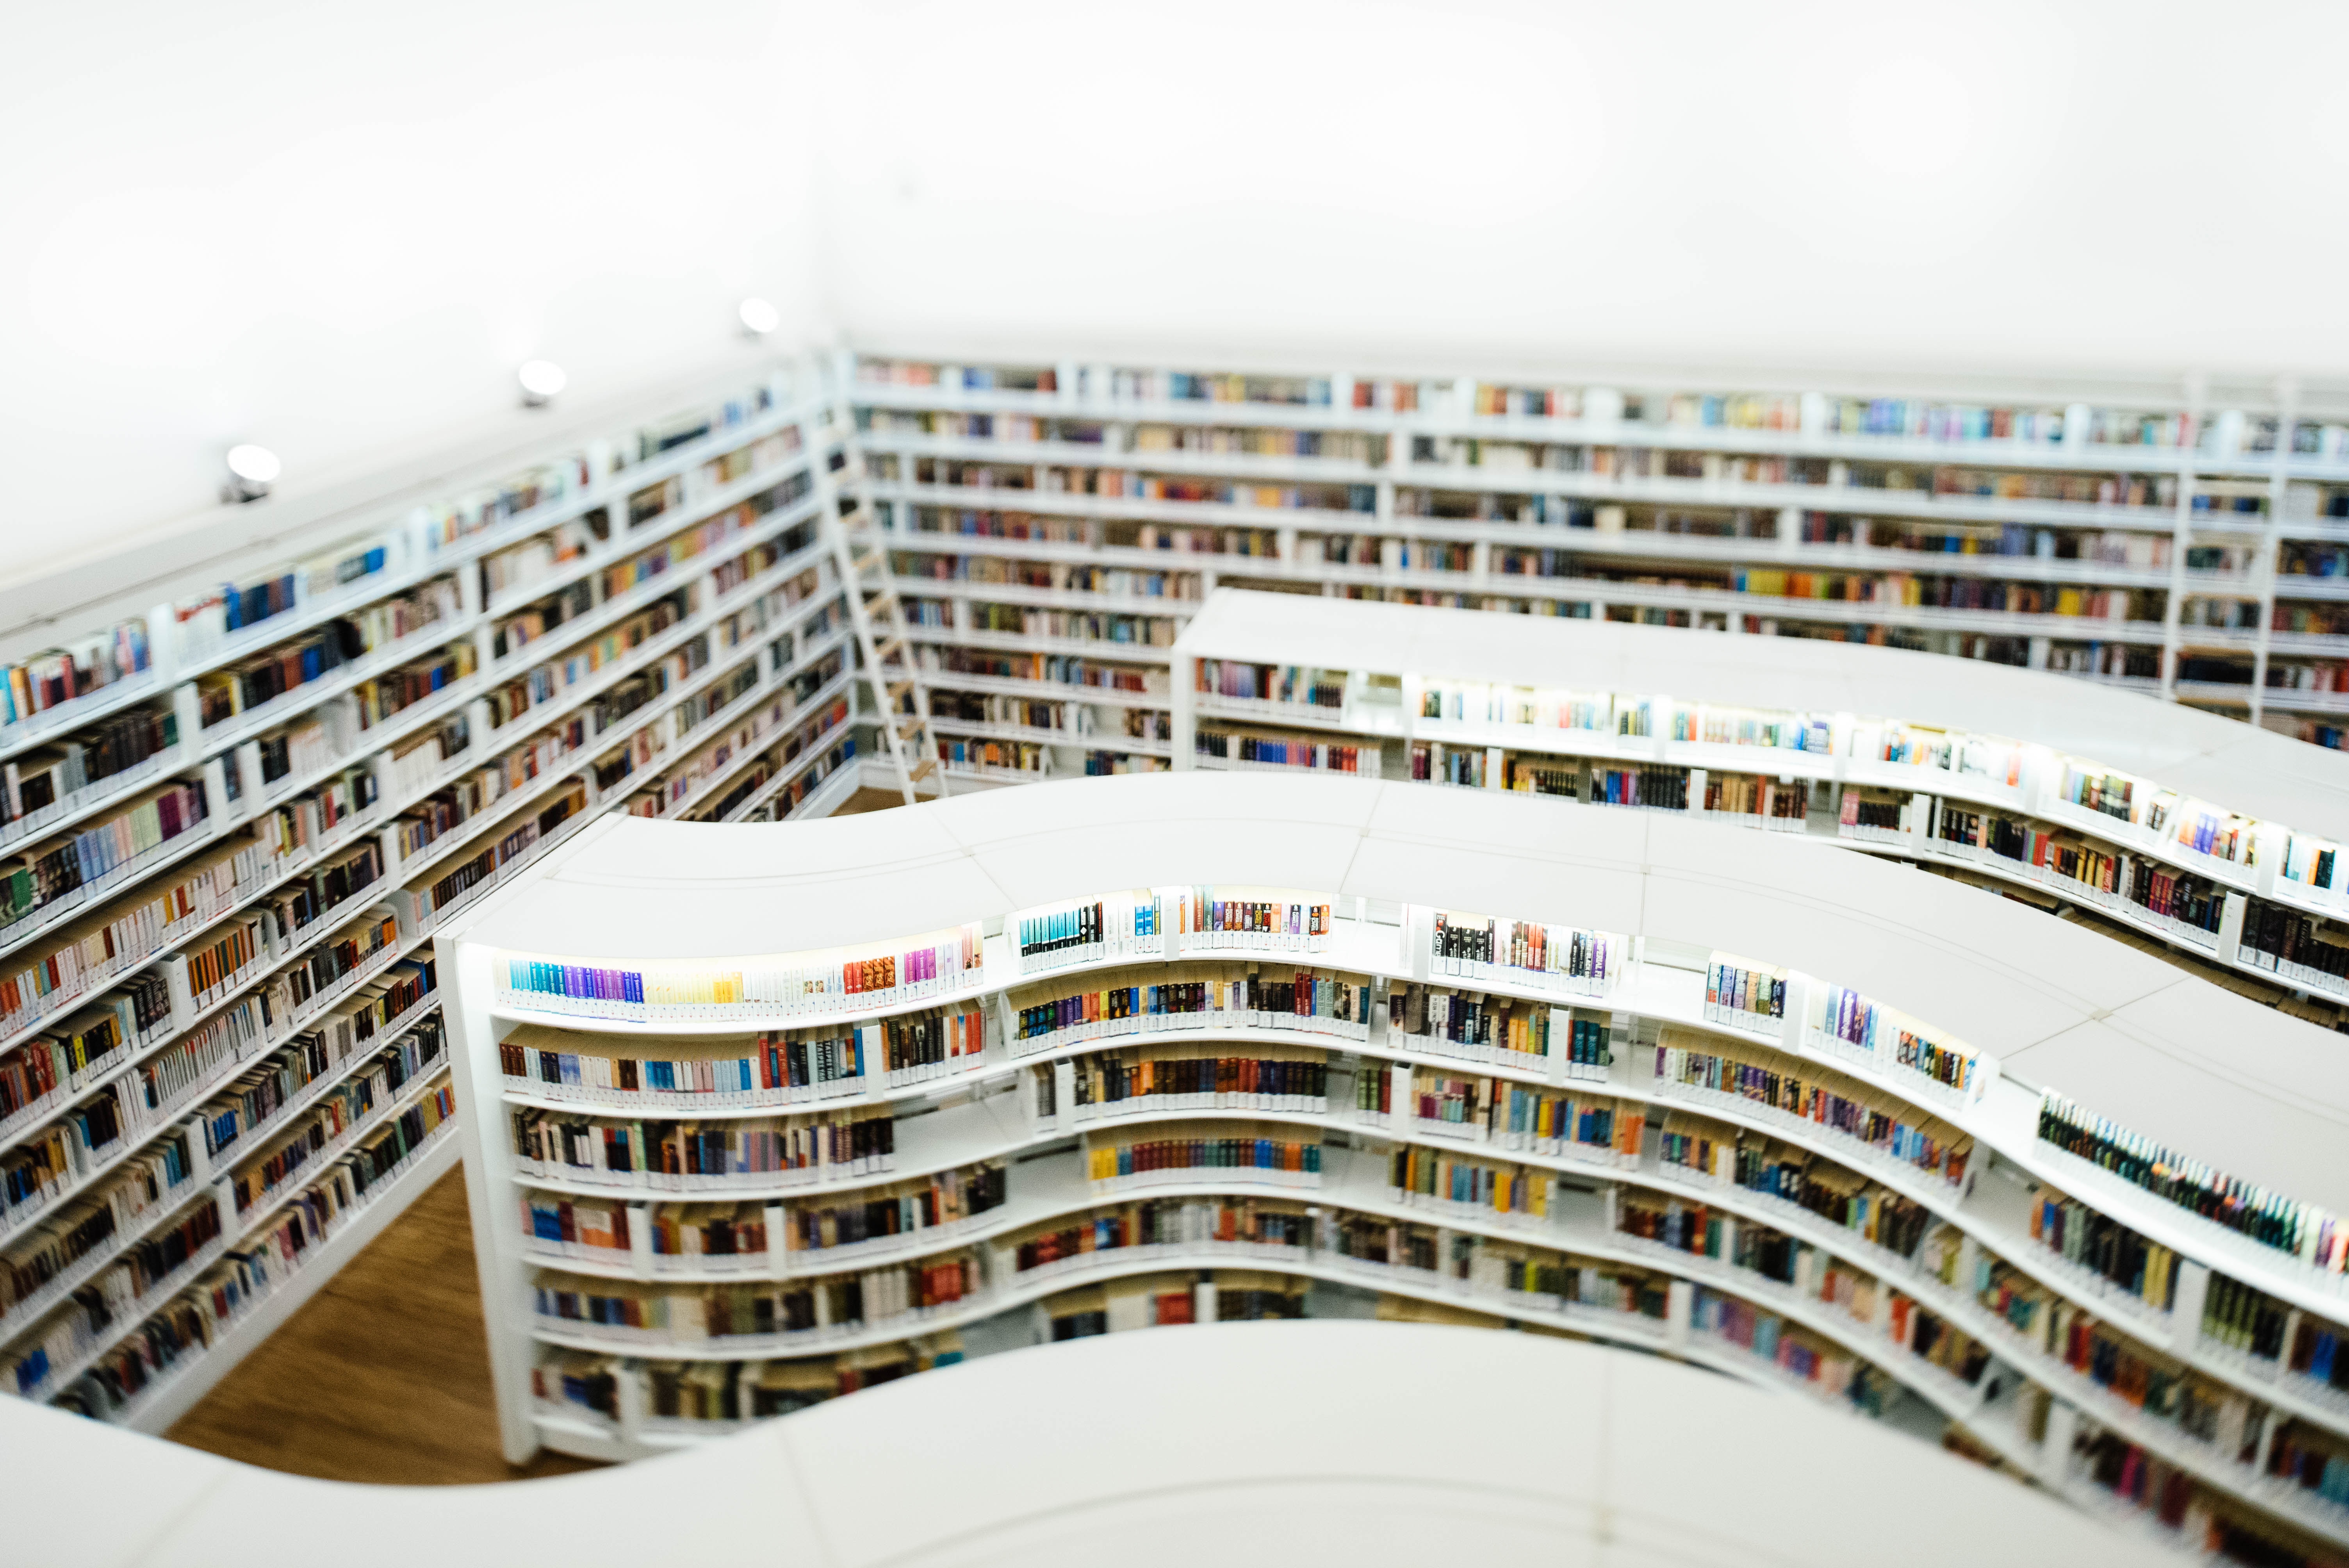 Arial view of wavy shelves filled with books, as if in a library.